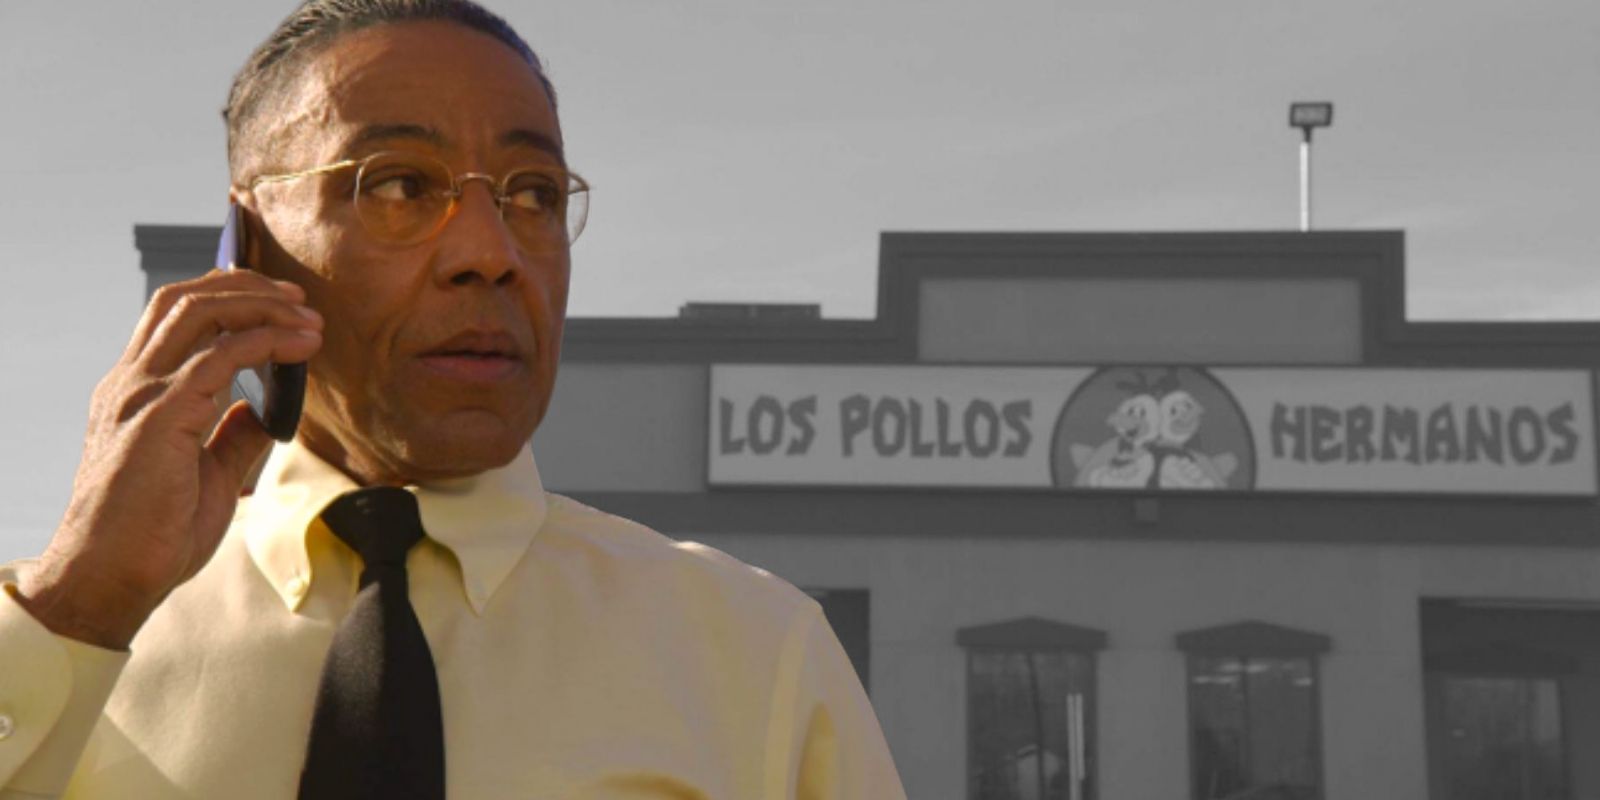 Gus Fring from Better Call Saul on a black and white background of Los Pollos Hermanos